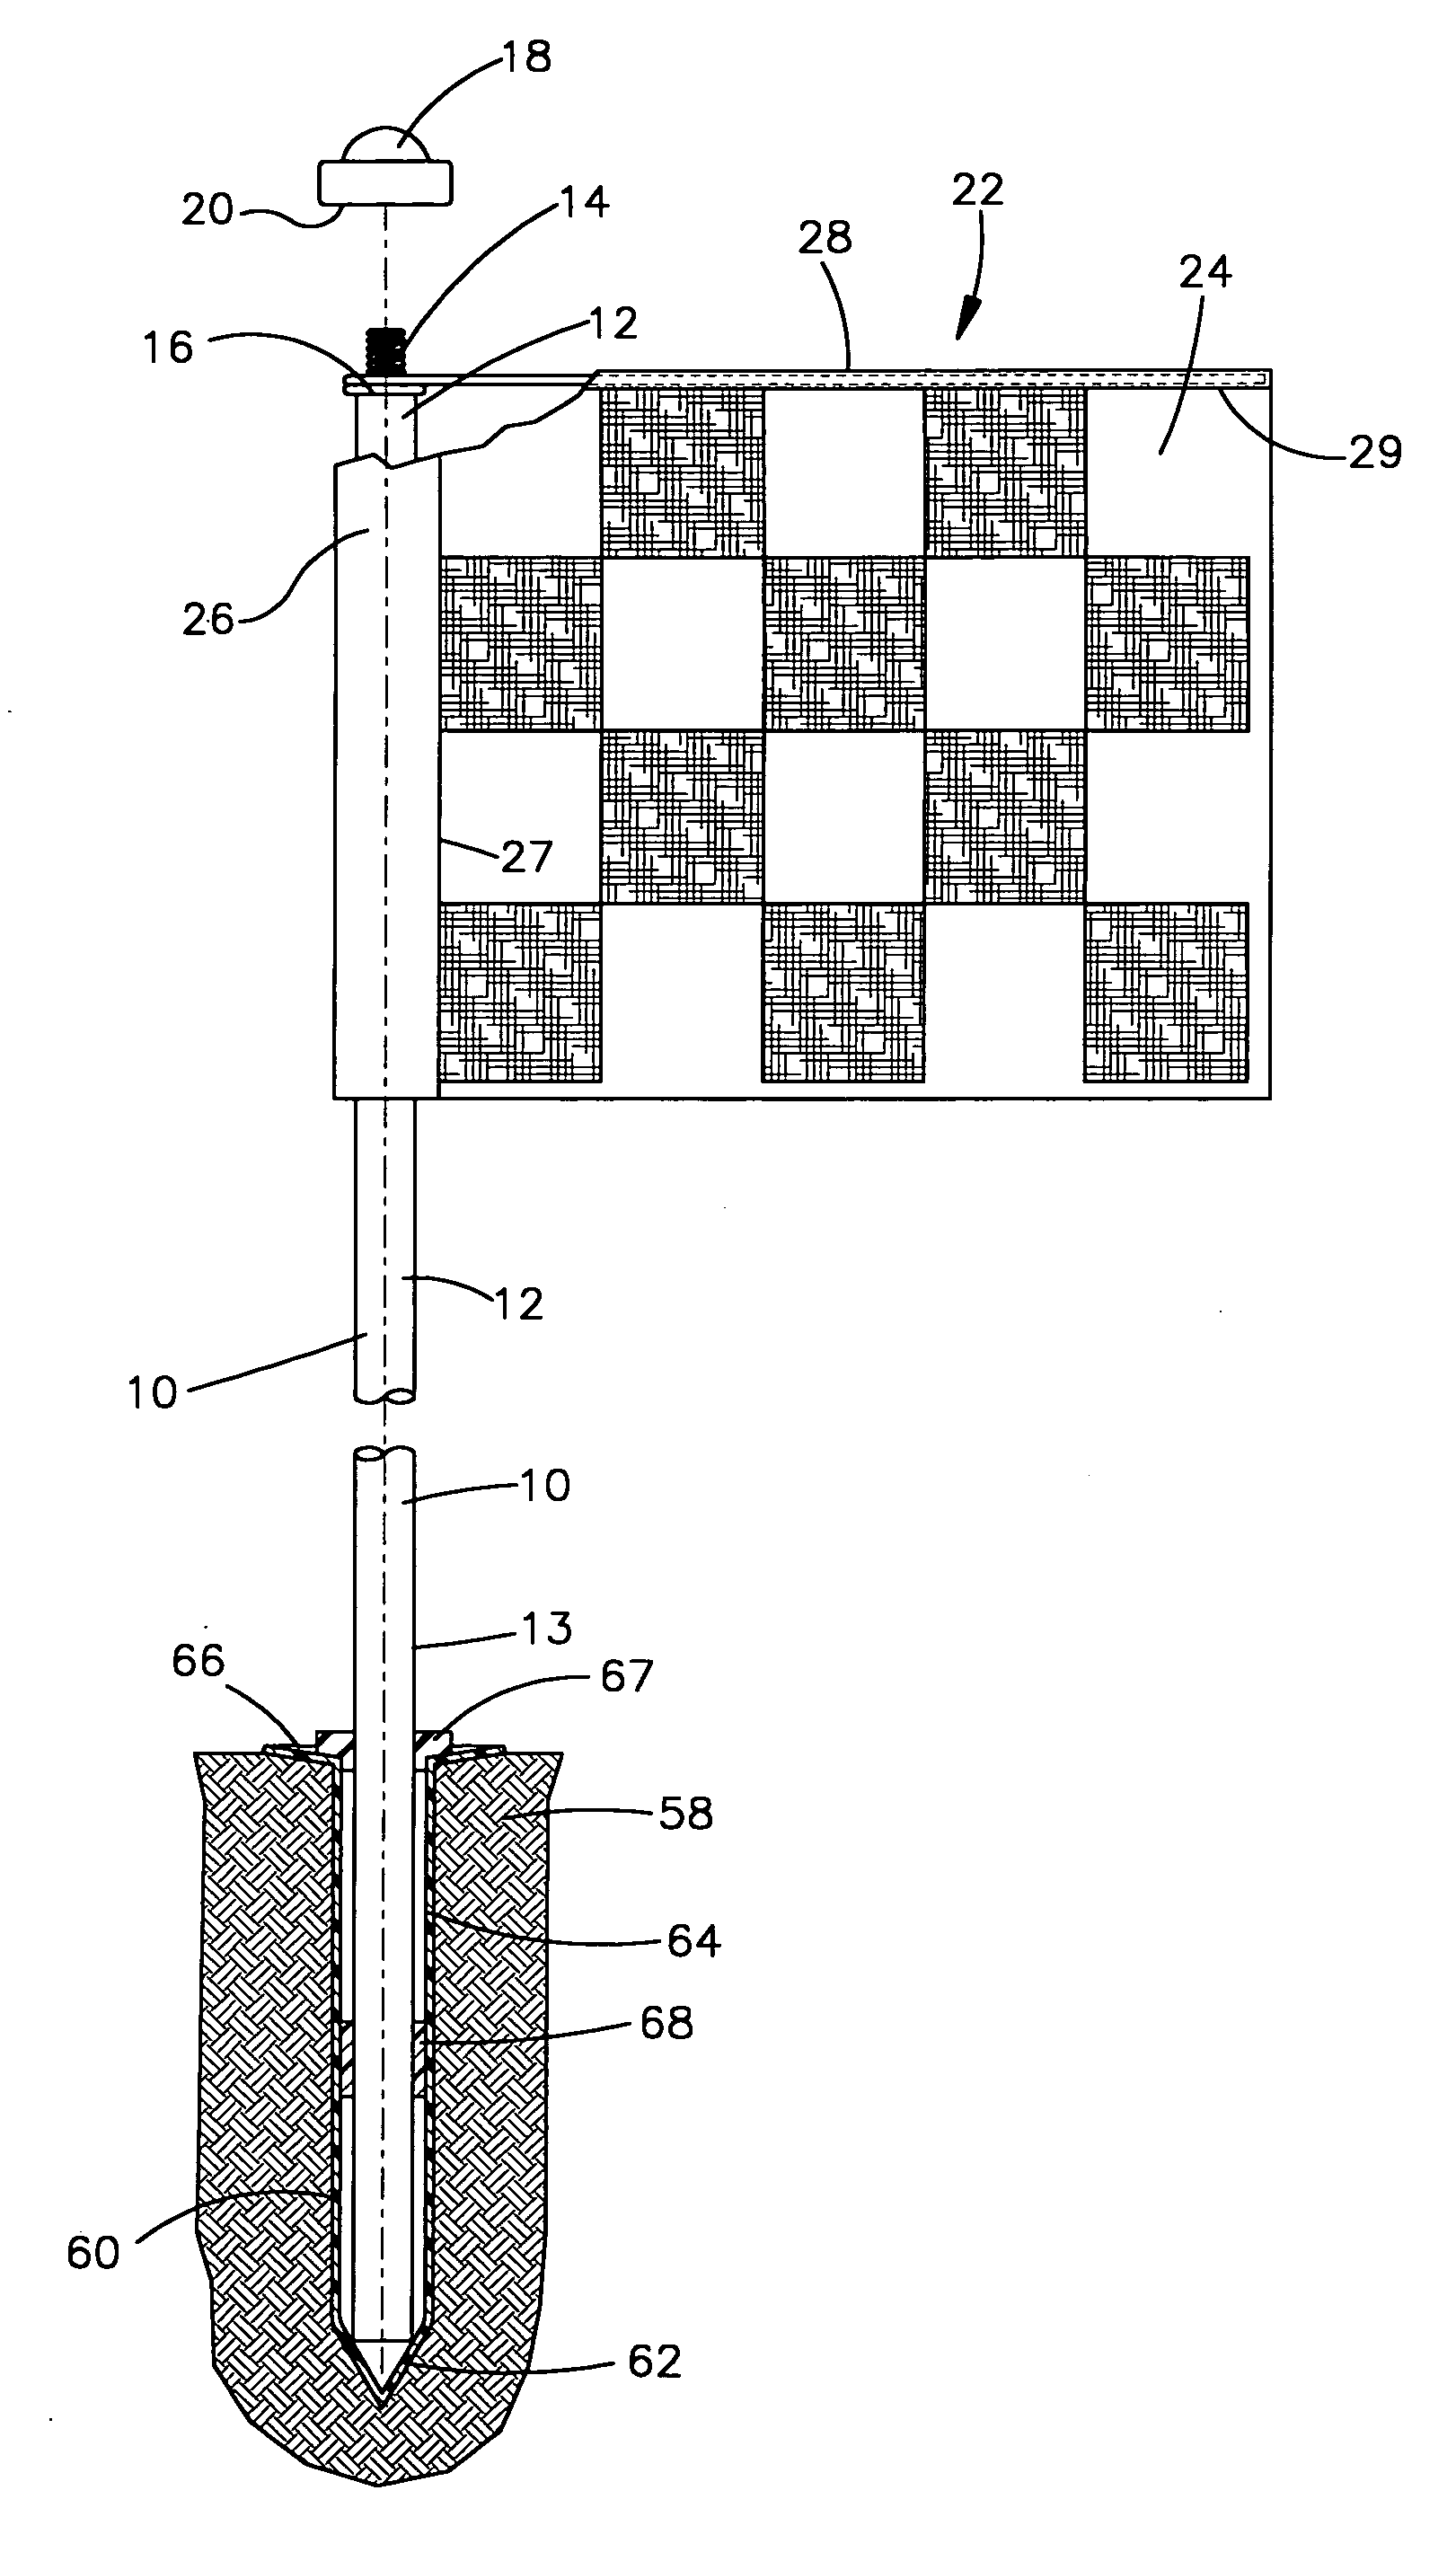 Decorative display flag with horizontally disposed rigid wire for attachment to flag poles for residential and commercial display uses